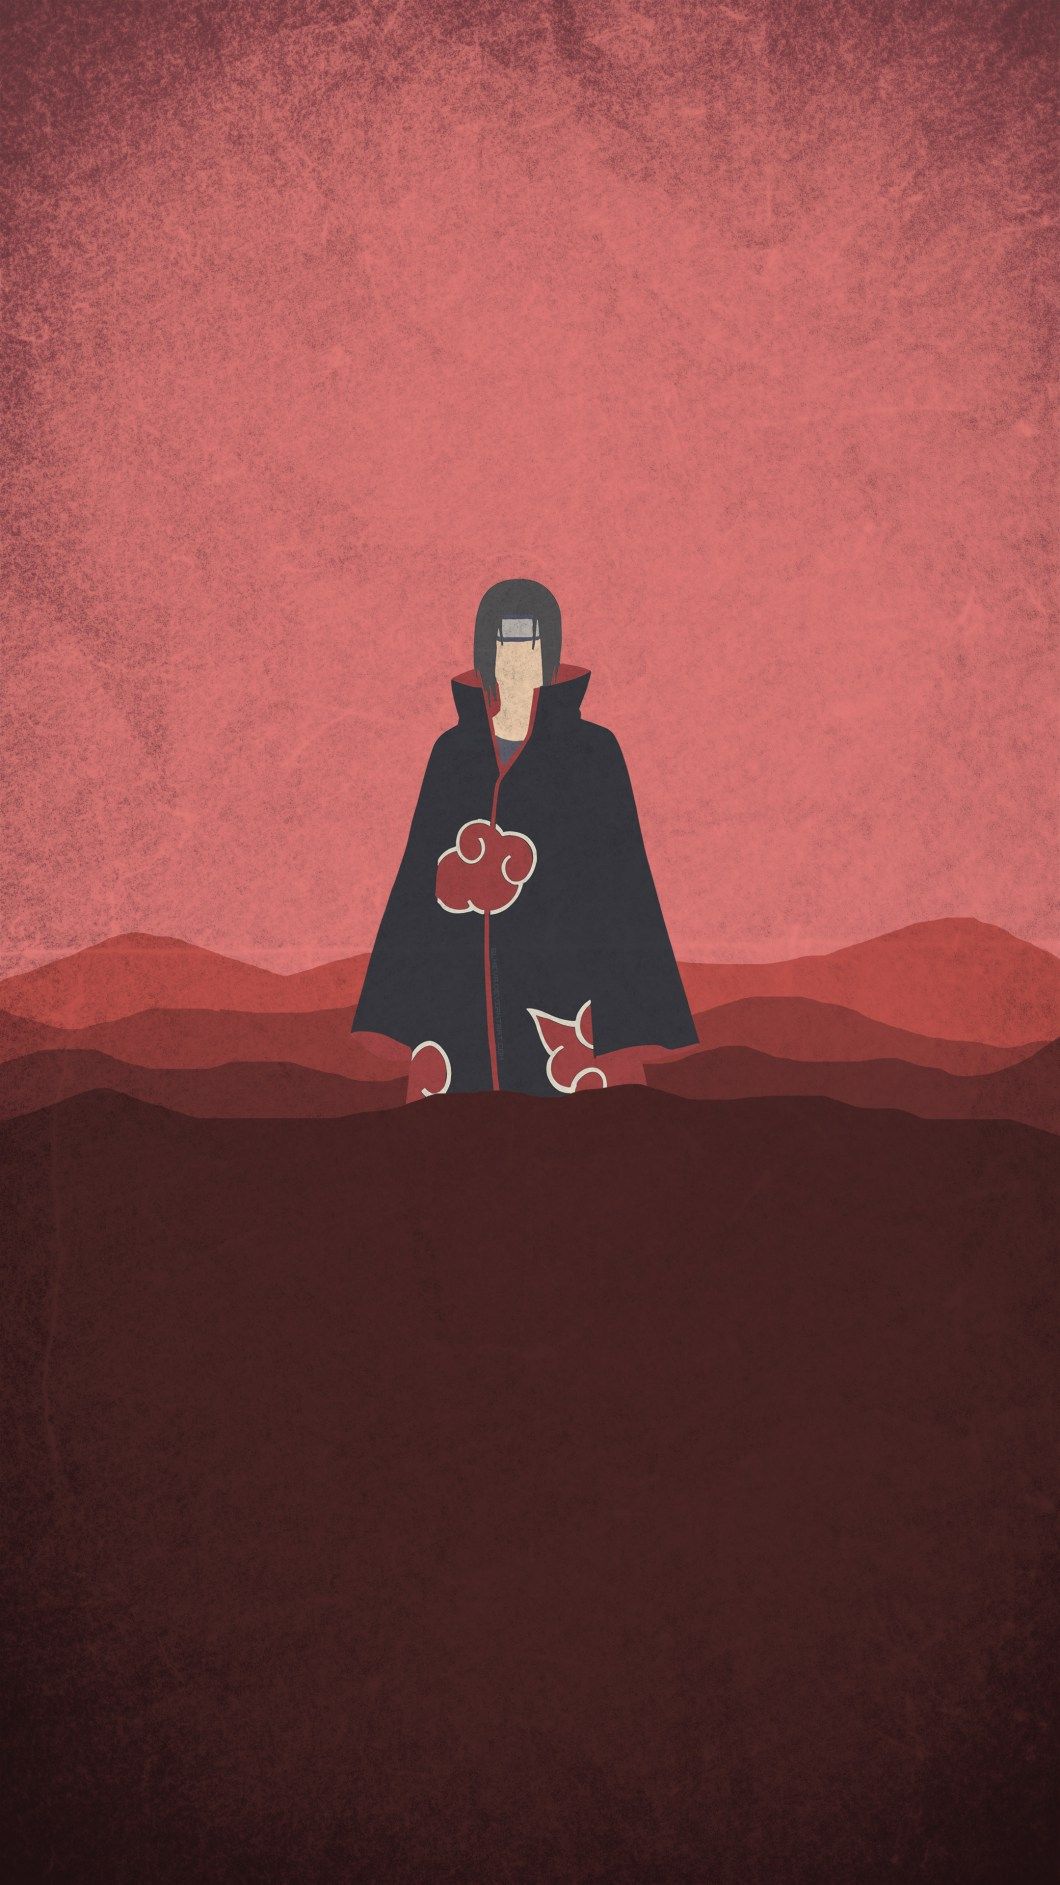 Itachi 4k Wallpaper For Android